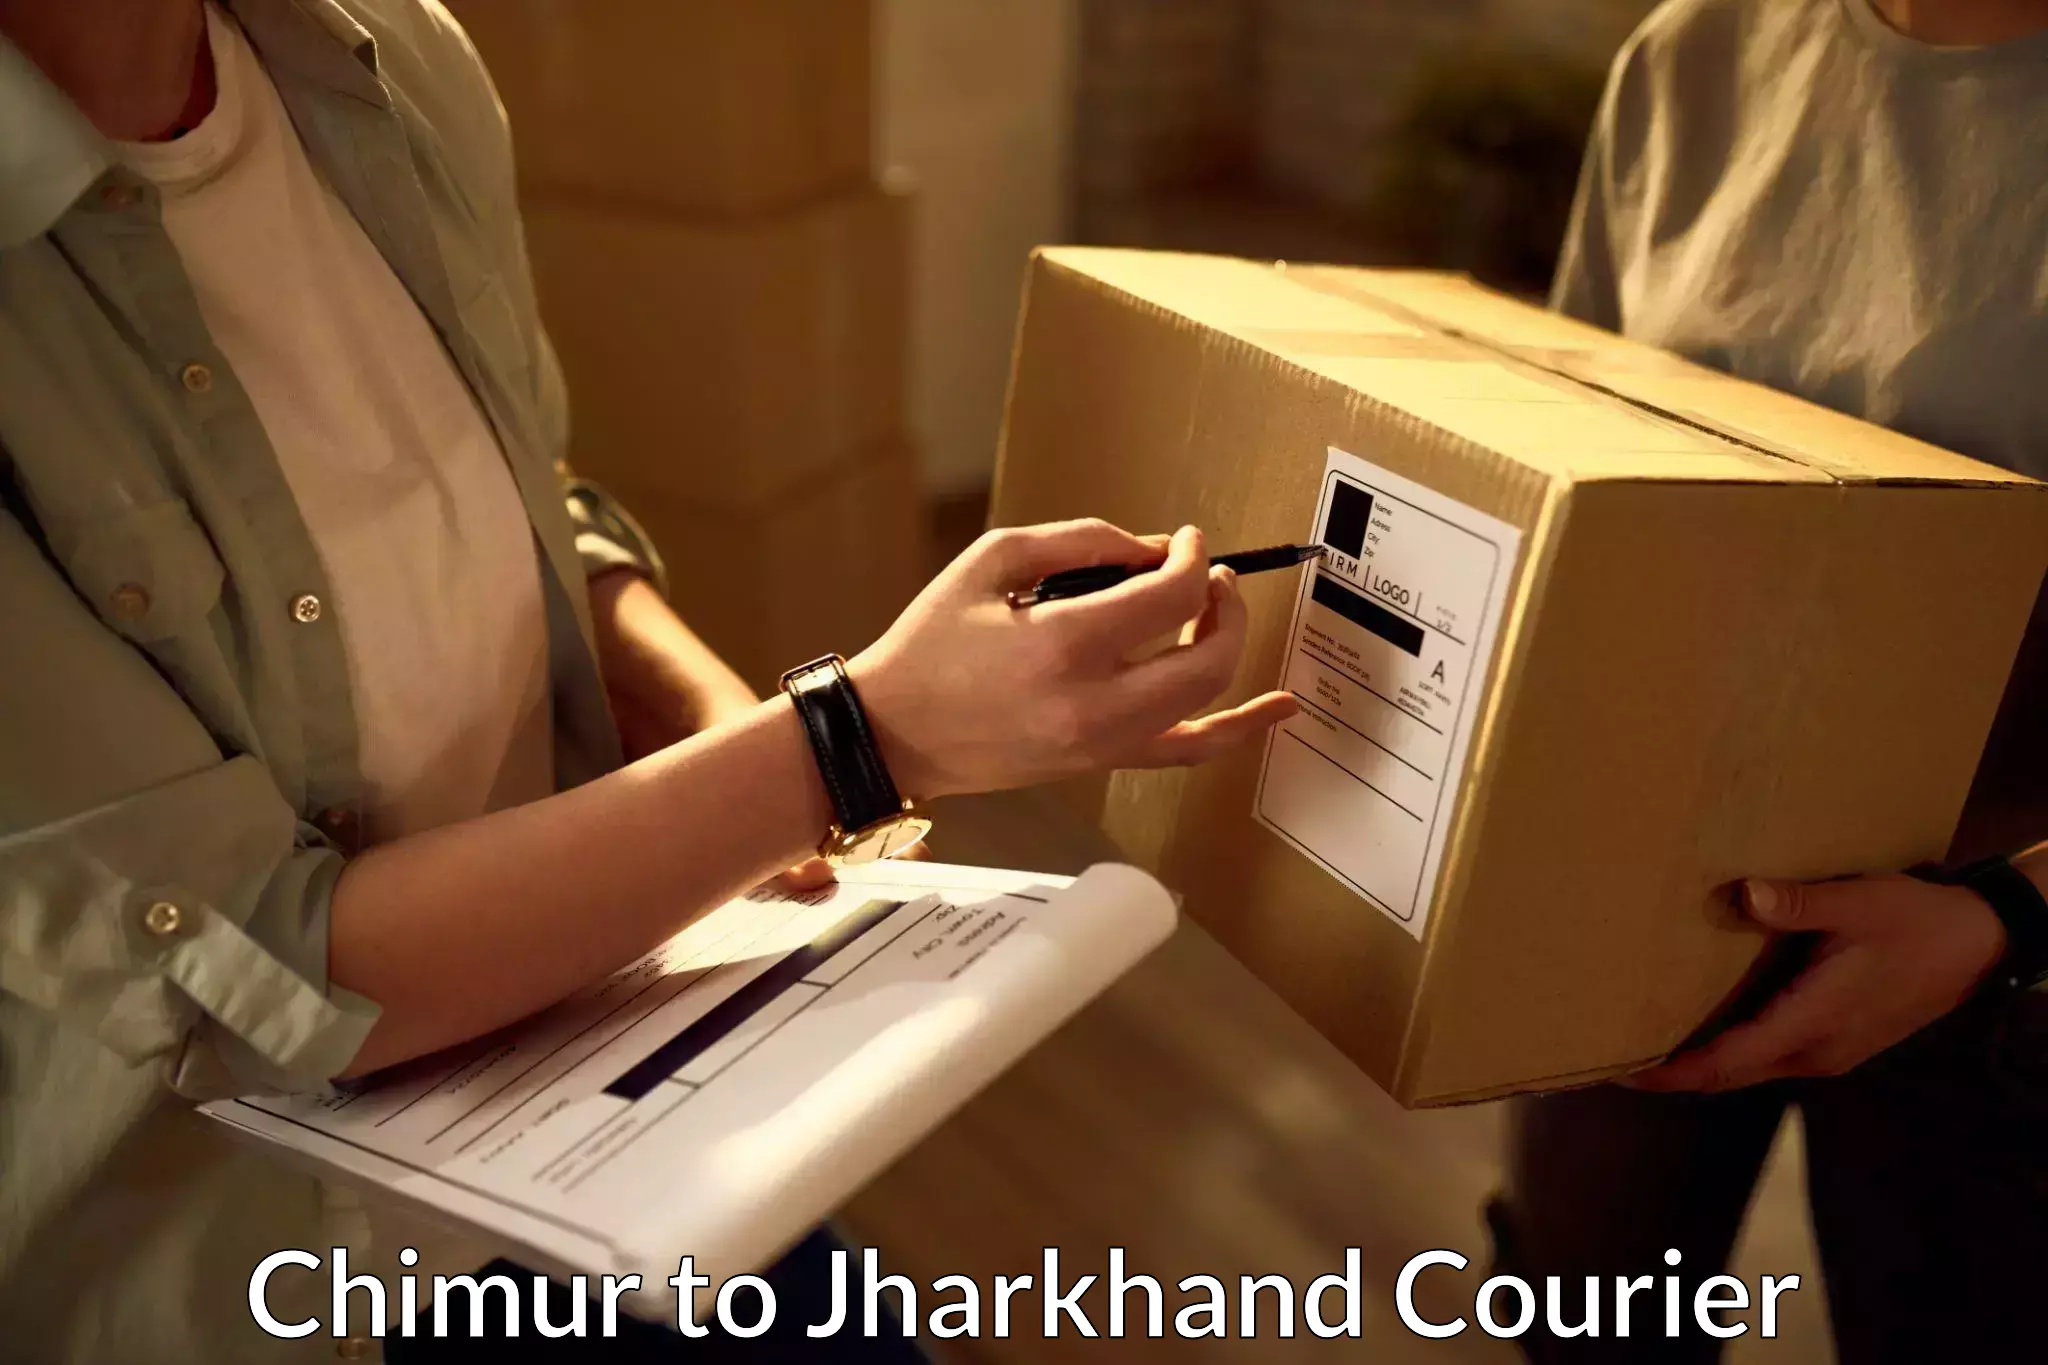 Customer-centric shipping Chimur to Jharkhand